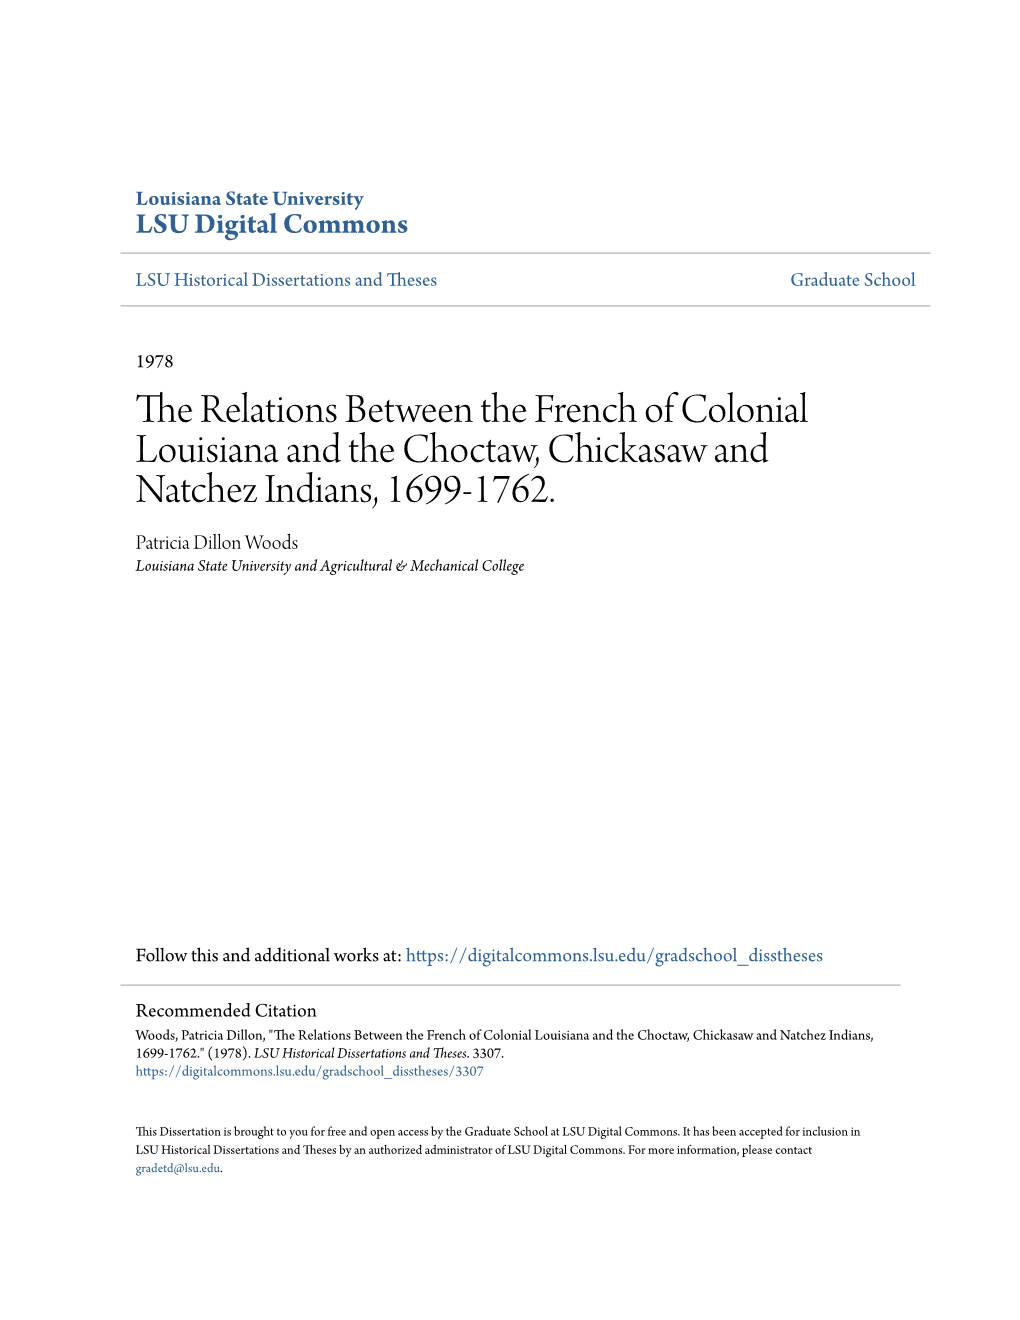 The Relations Between the French of Colonial Louisiana and the Choctaw, Chickasaw and Natchez Indians, 1699-1762